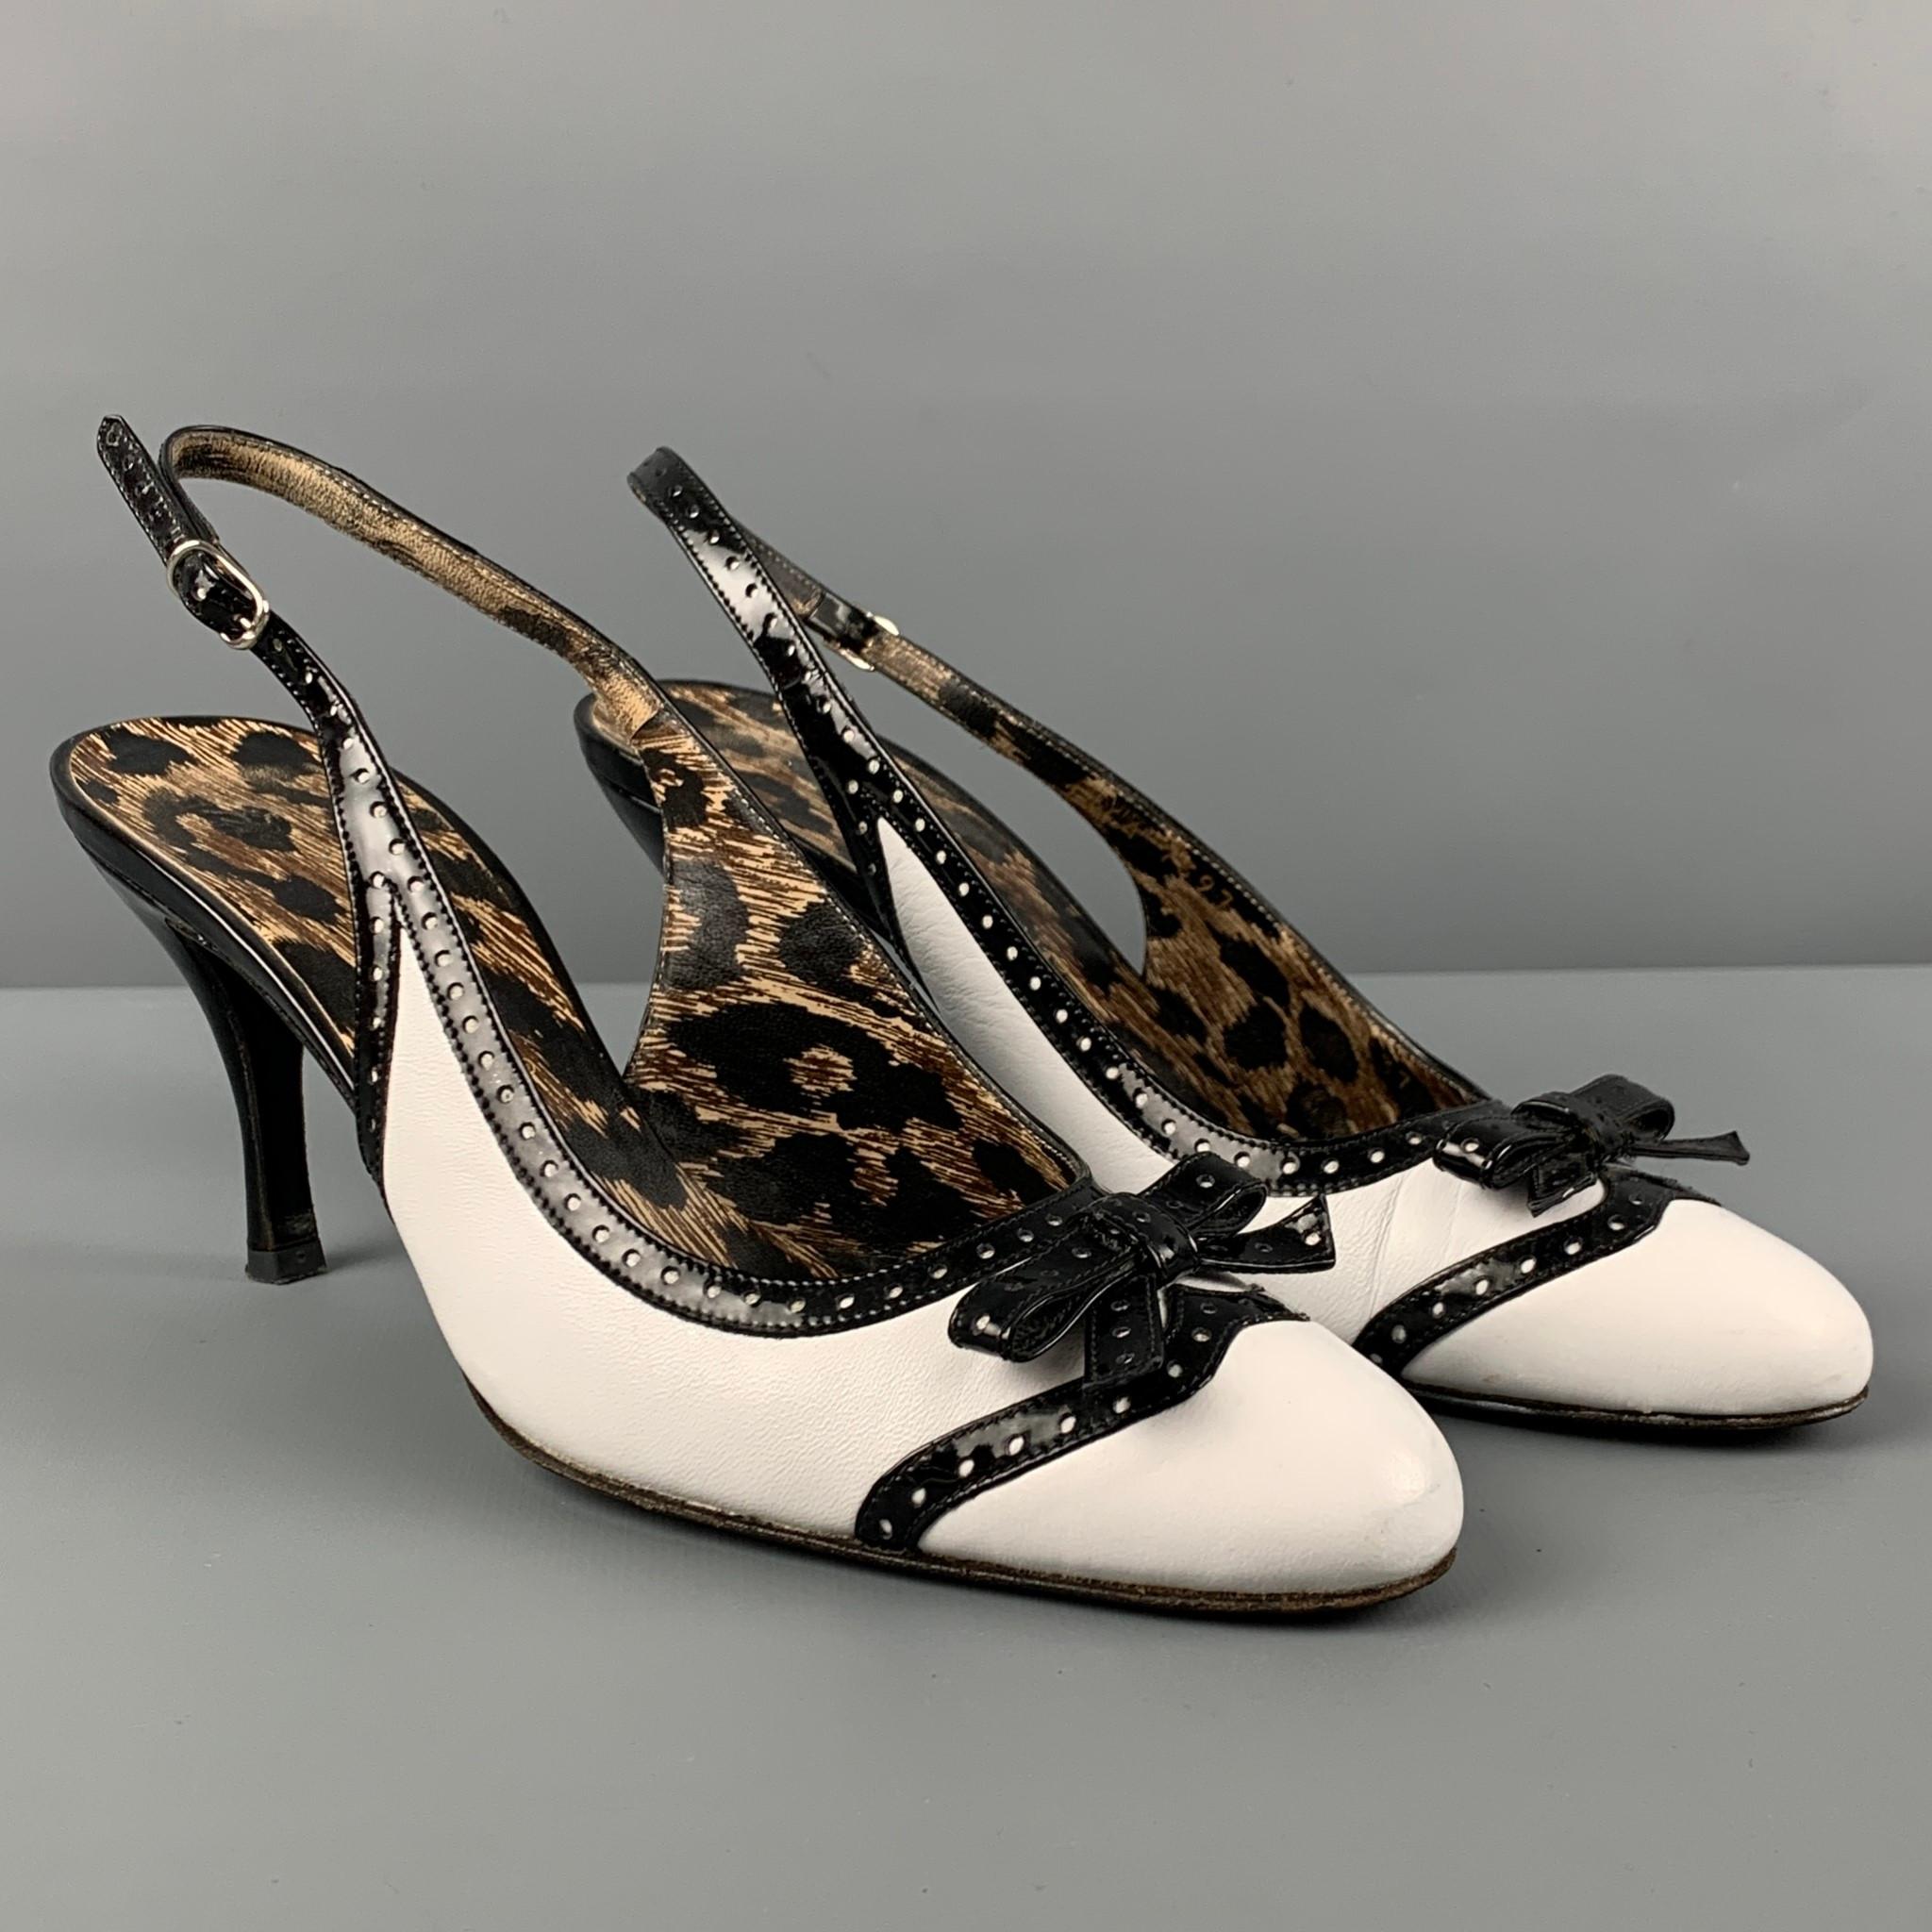 DOLCE & GABBANA pumps comes in a white & black leather with a animal print interior featuring a front bow detail, slingback closure, and a stiletto heel. Made in Italy. 

Very Good Pre-Owned Condition.
Marked: 37

Measurements:

Heel: 3 in. 